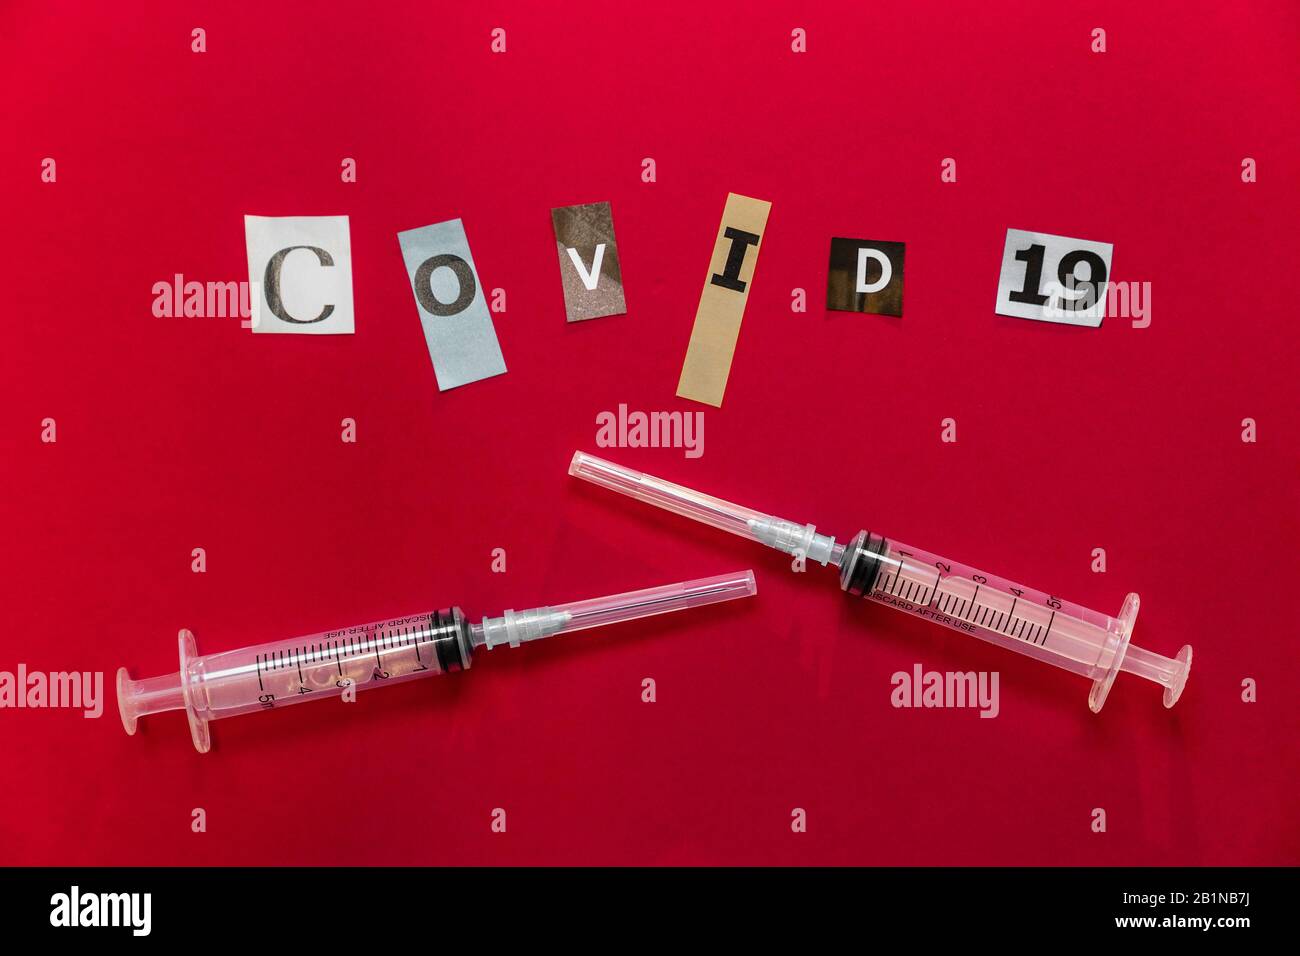 Two medical syringes and COVID-19 text made  of paper-cut letters on red background. Copy space. Chinese coronavirus outbreak Stock Photo